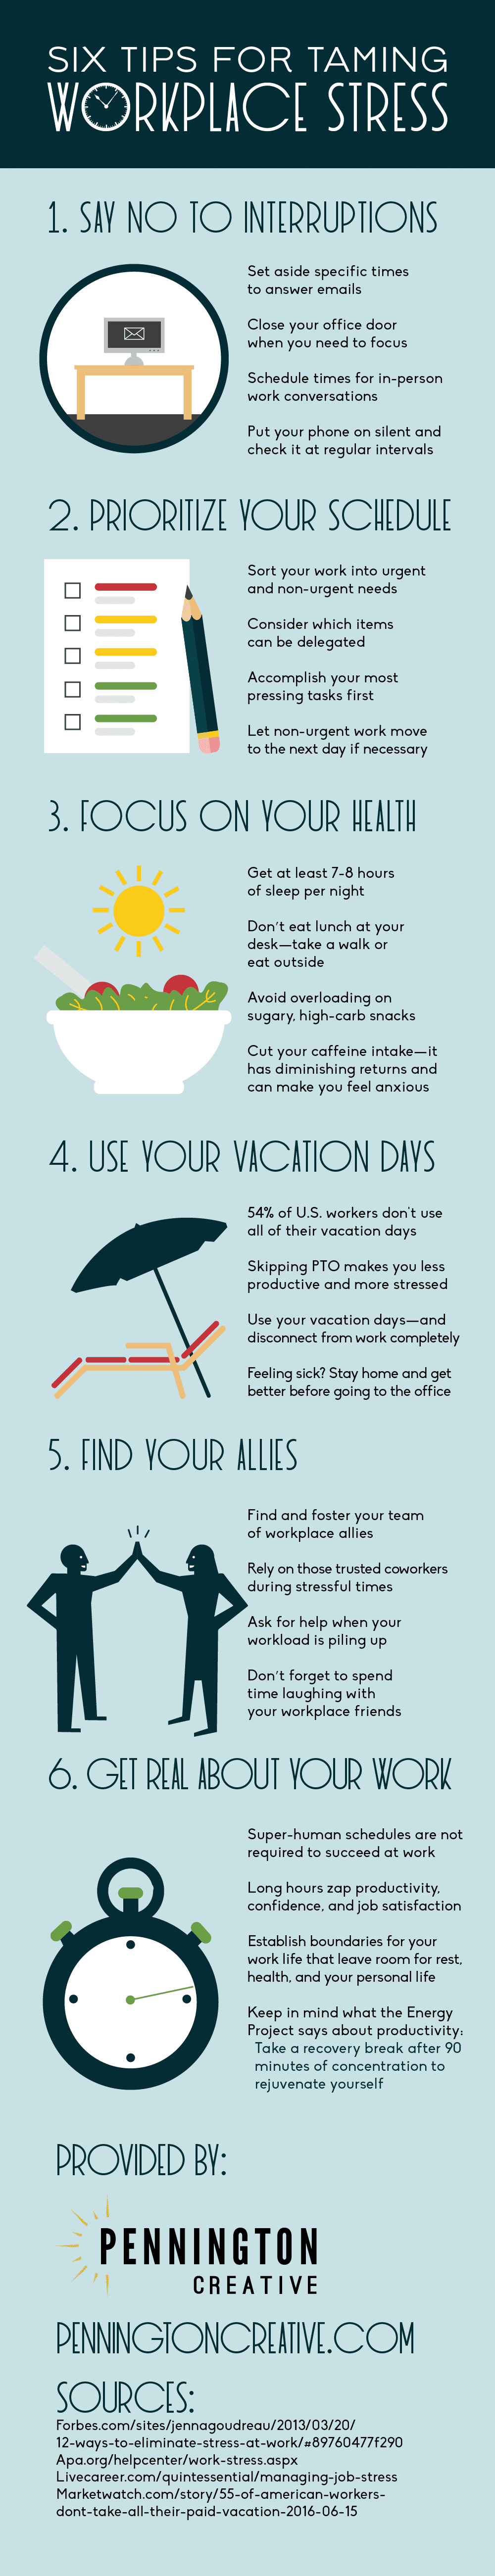 Infographic with tips for preventing workplace stress.